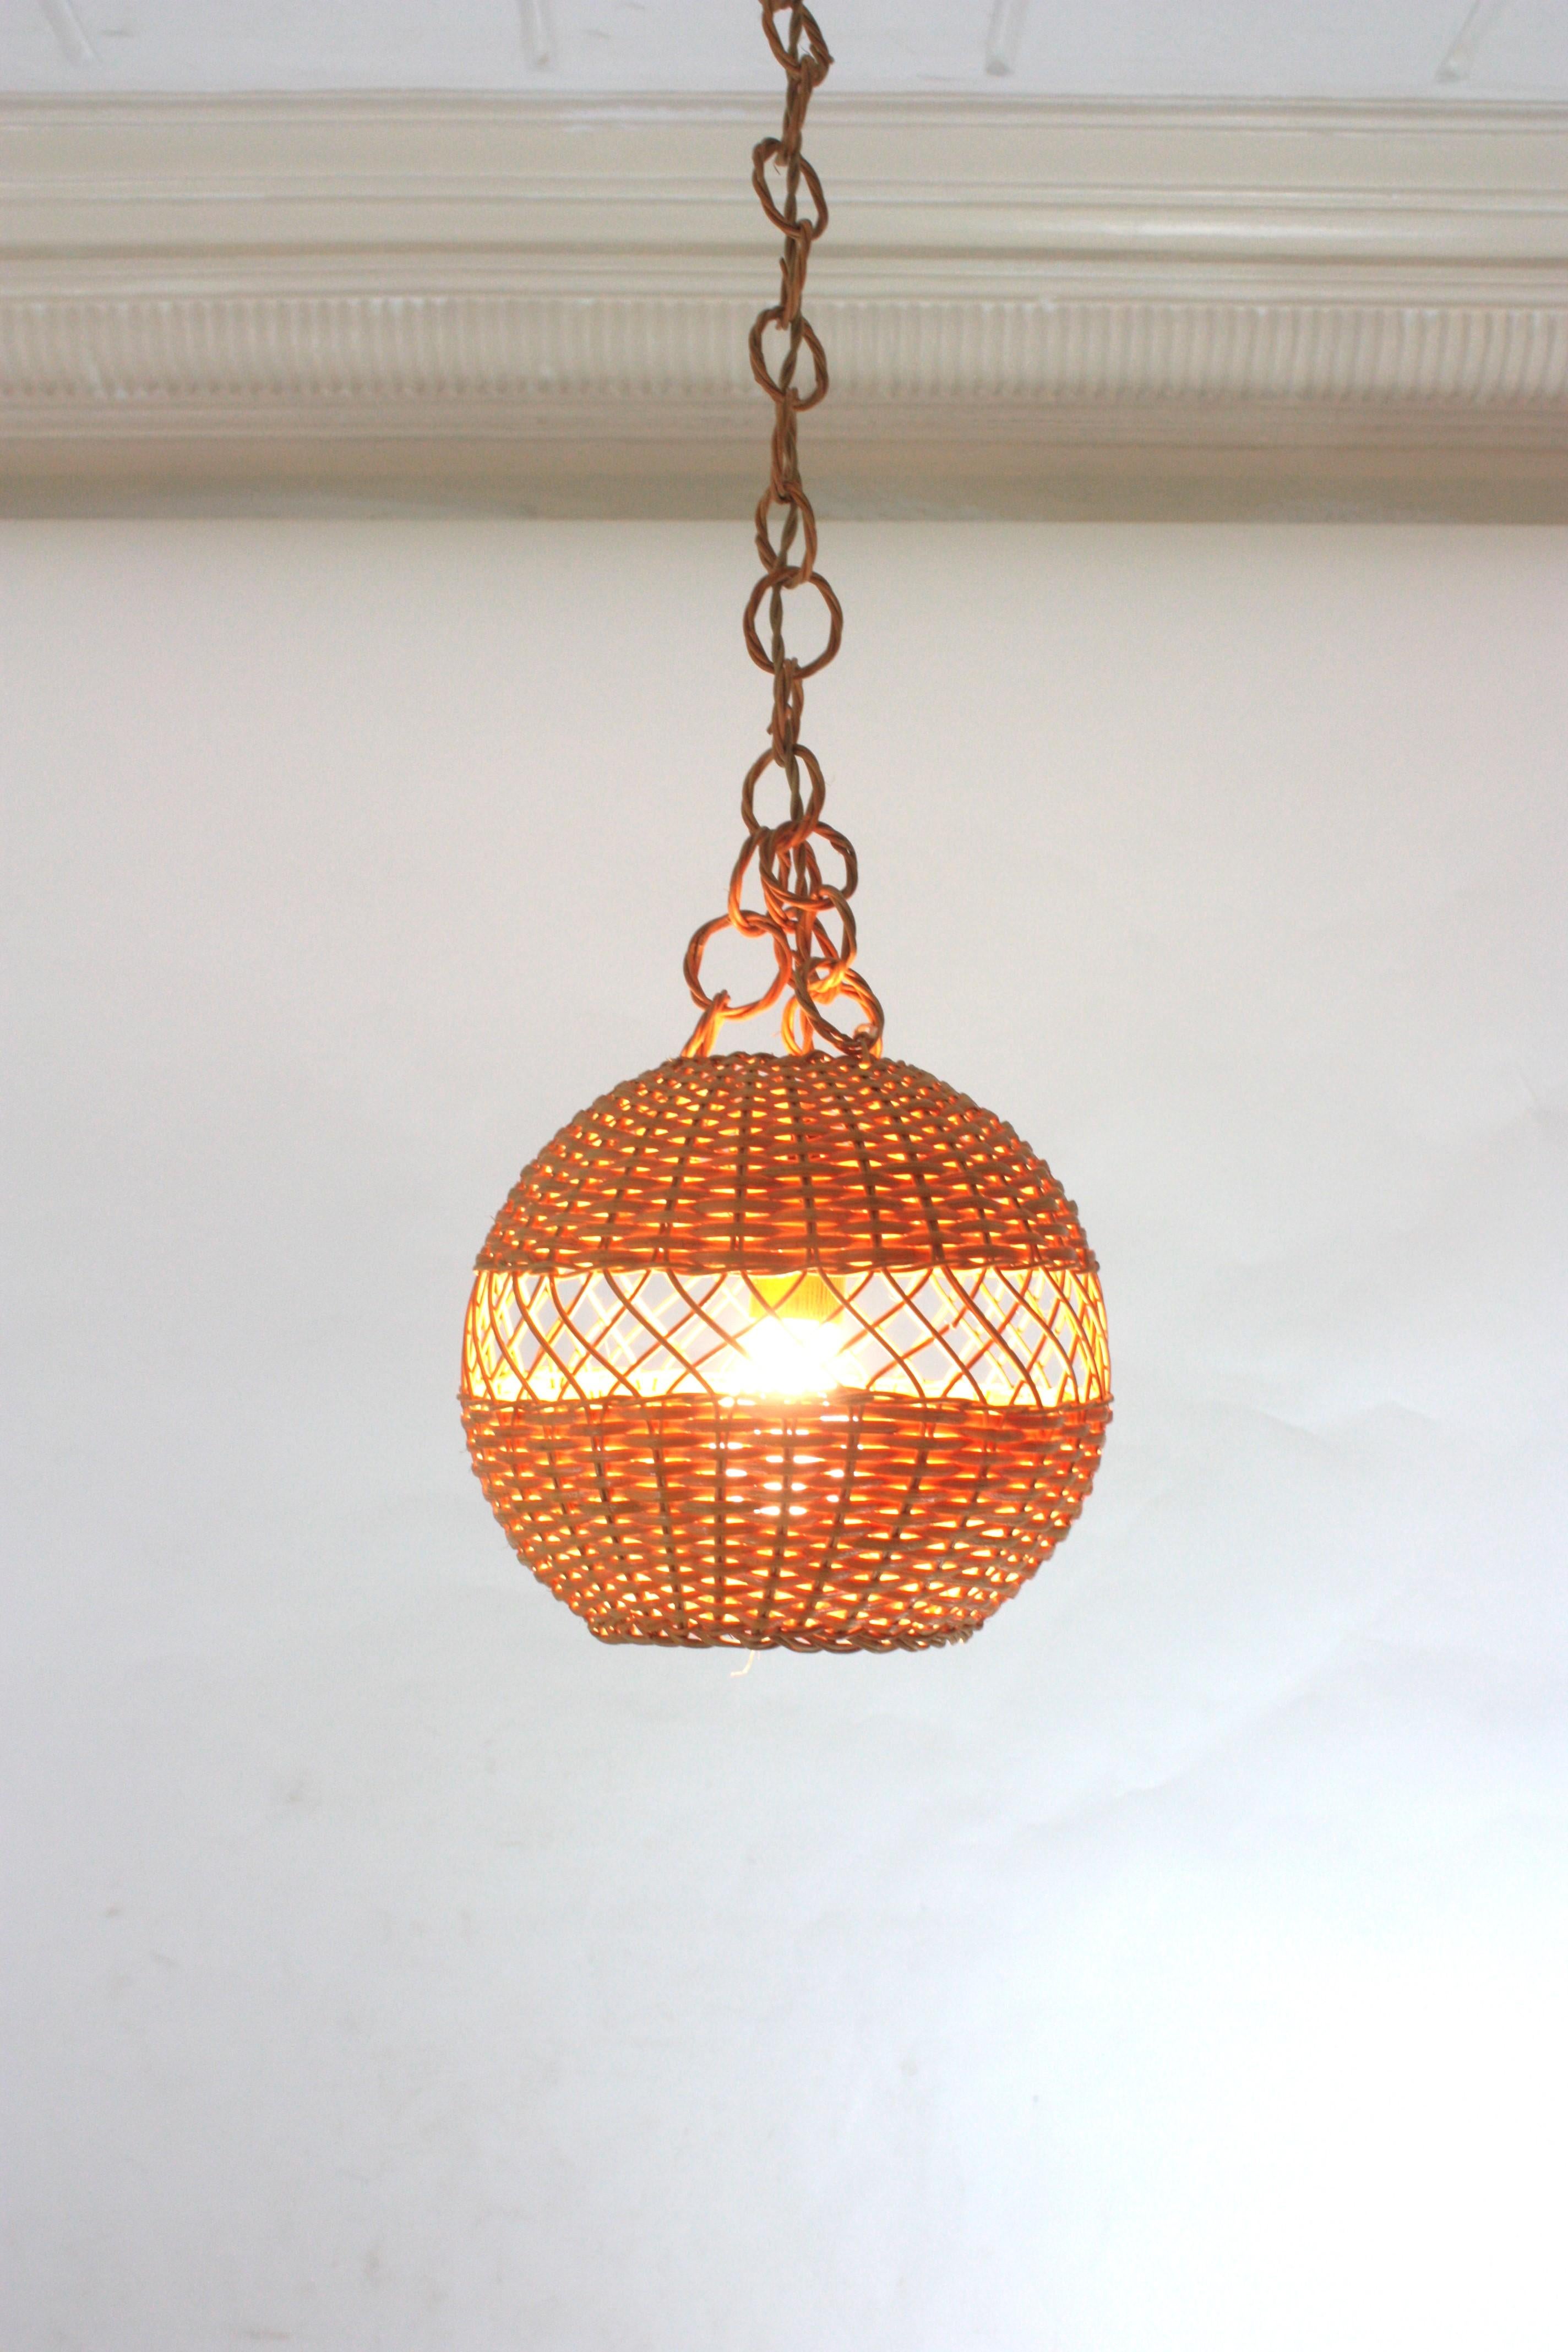 Pair of Handwoven Wicker Globe Pendant Lights or Lanterns For Sale 5